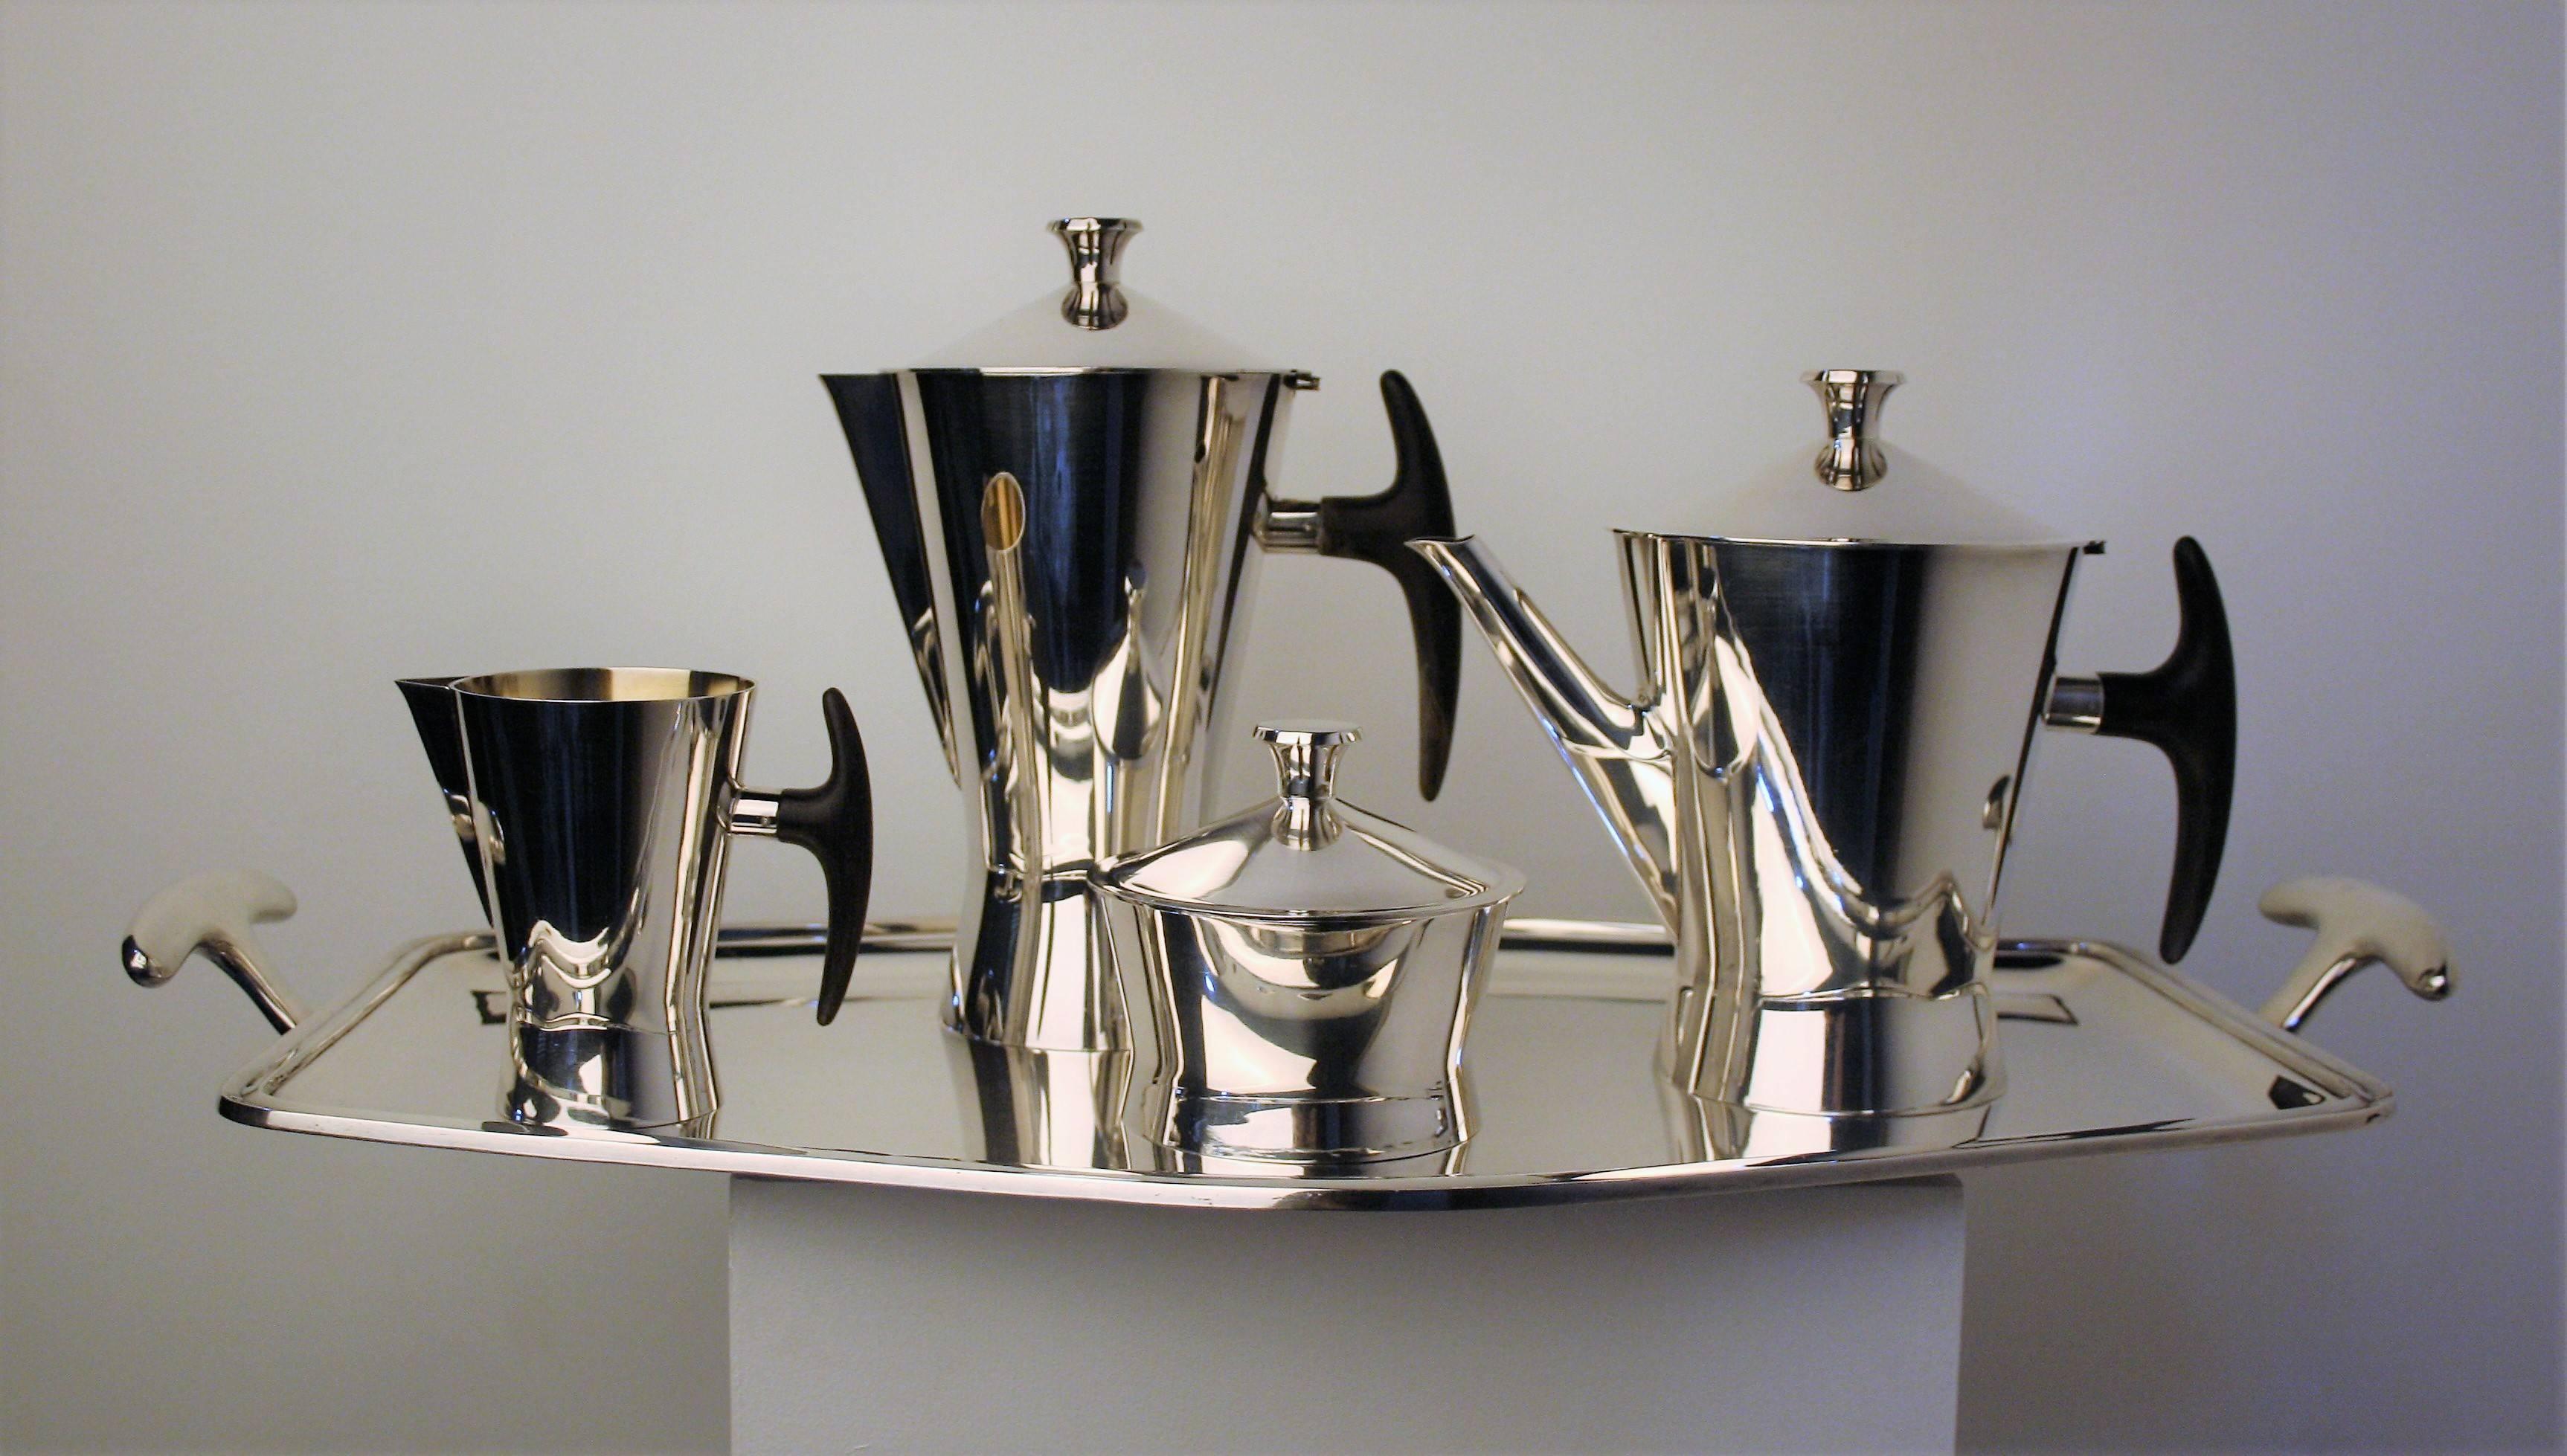 A stunning midcentury silver plated coffee and tea set designed and manufactured by the Belgian firm Delheid, as part of their 'Sivar' range of plated wares. Founded in Brussels in 1870, Delheid were one of the oldest and most respected silversmiths